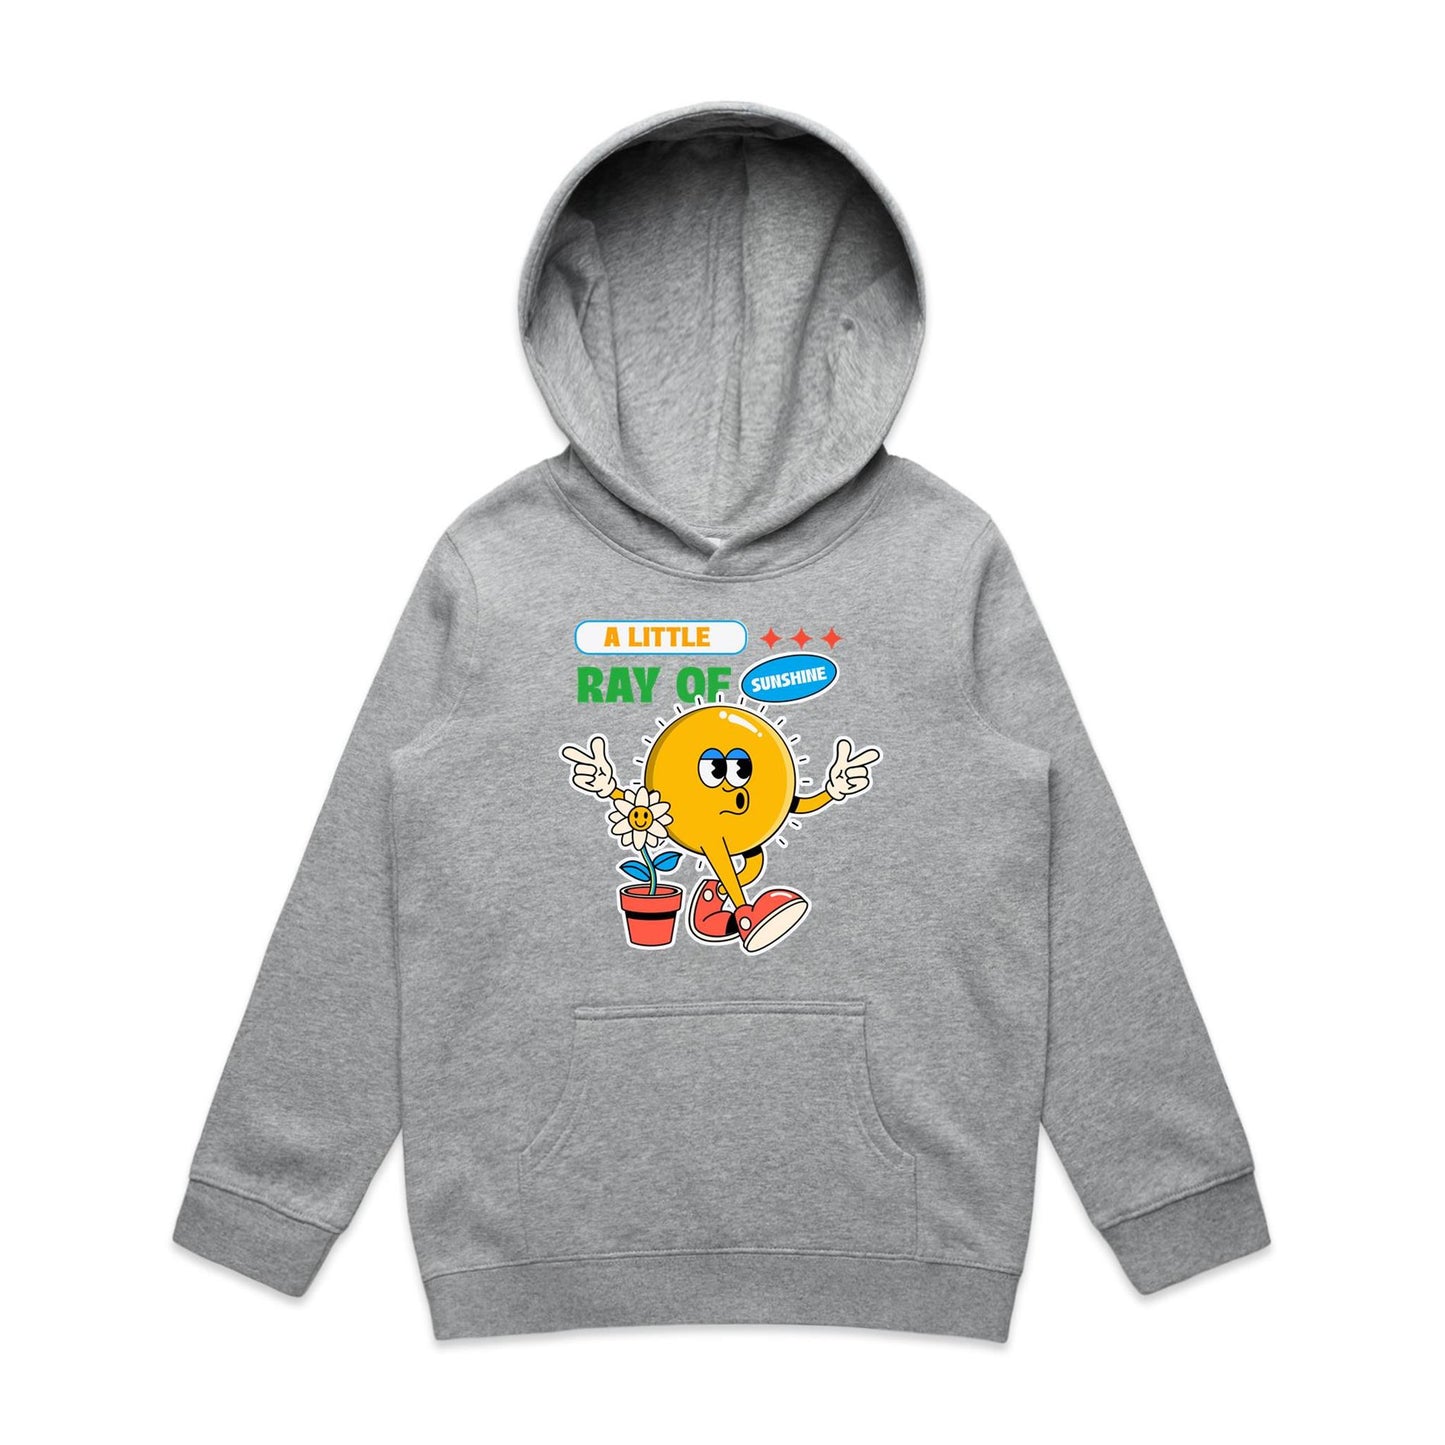 A Little Ray Of Sunshine - Youth Supply Hood Grey Marle Kids Hoodie Retro Summer